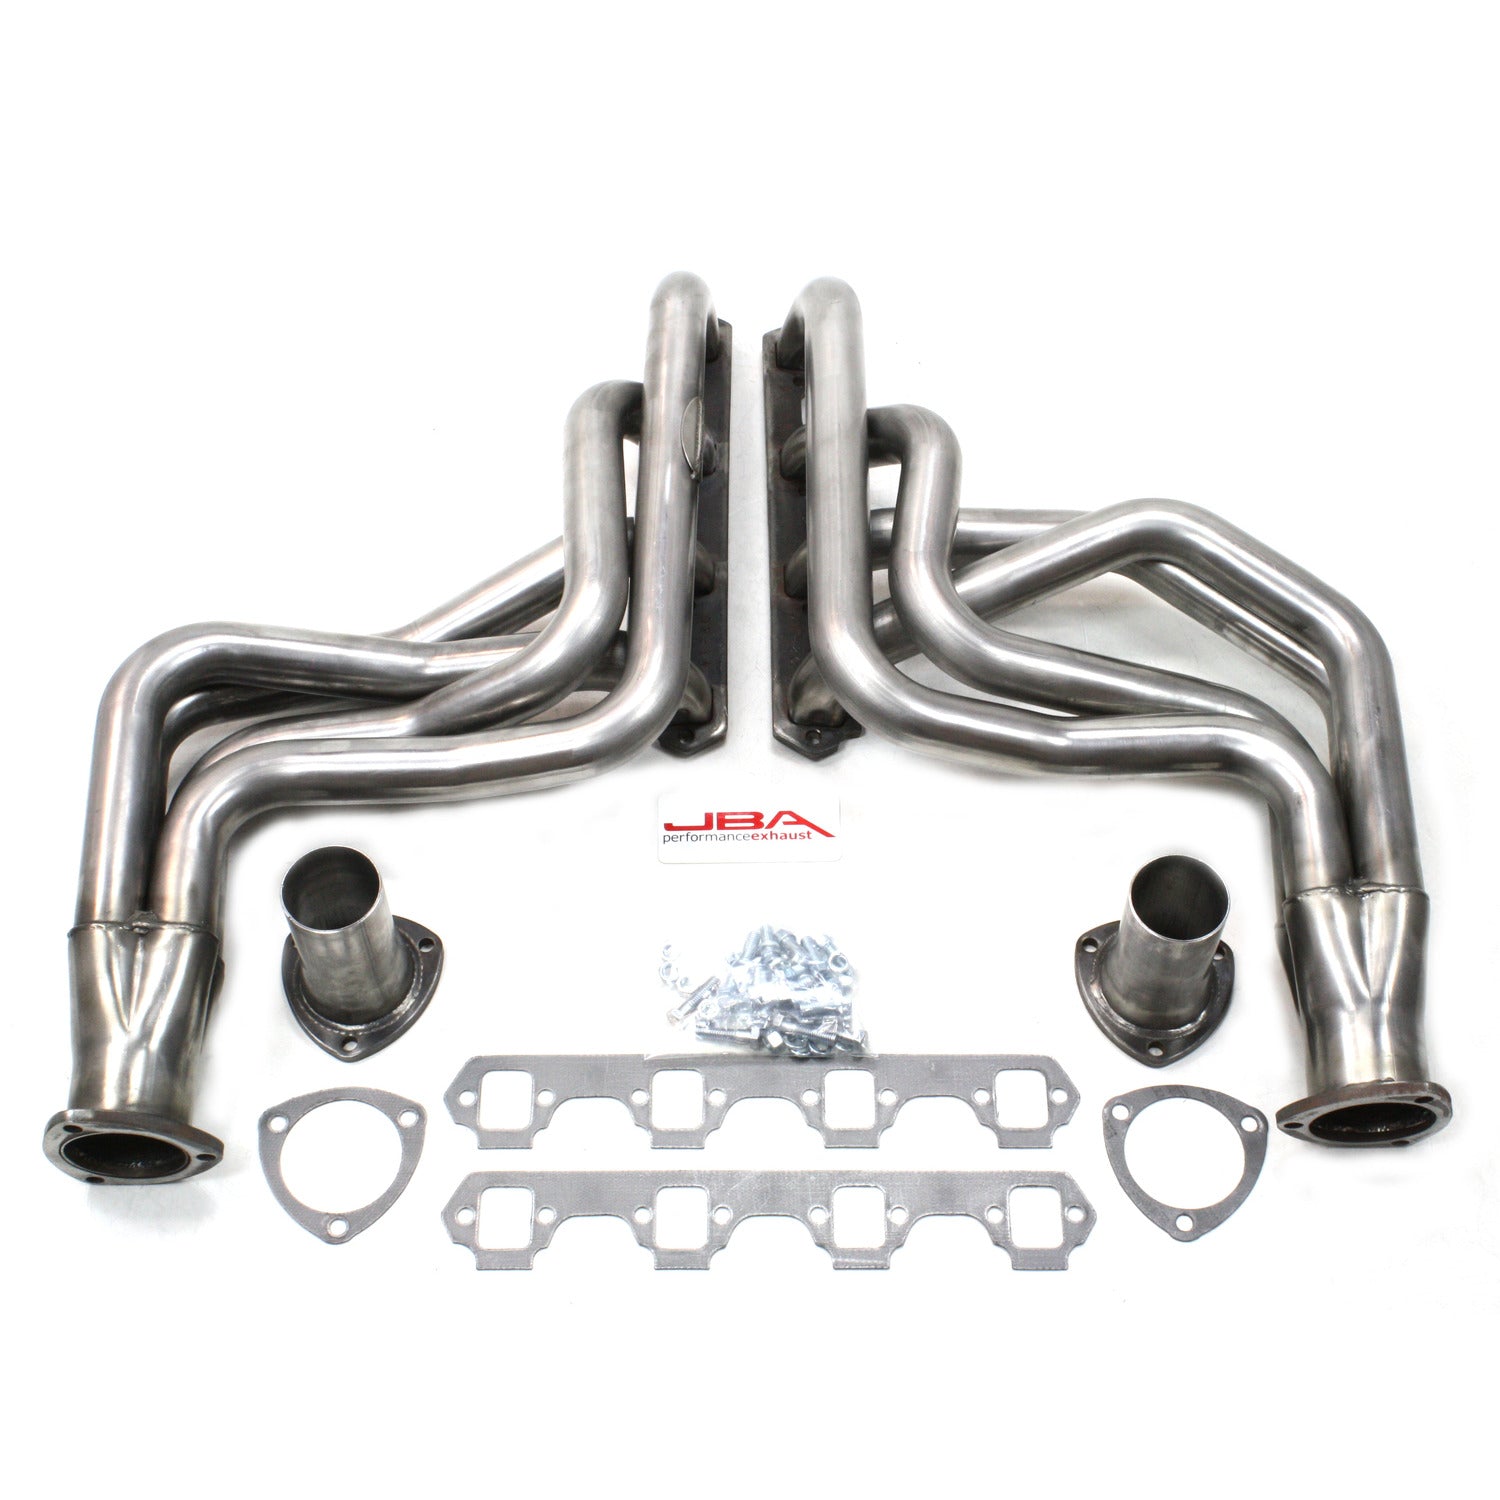 JBA Performance Exhaust 6612S 1 3/4" Header Long Tube Stainless Steel Mustang 64-73 Cougar 67-68 Fairlane 66-67 Falcon 60-65 Comet 62-65, Ranchero 60-67 260-351W with TCI or similar Mustang II steering swap